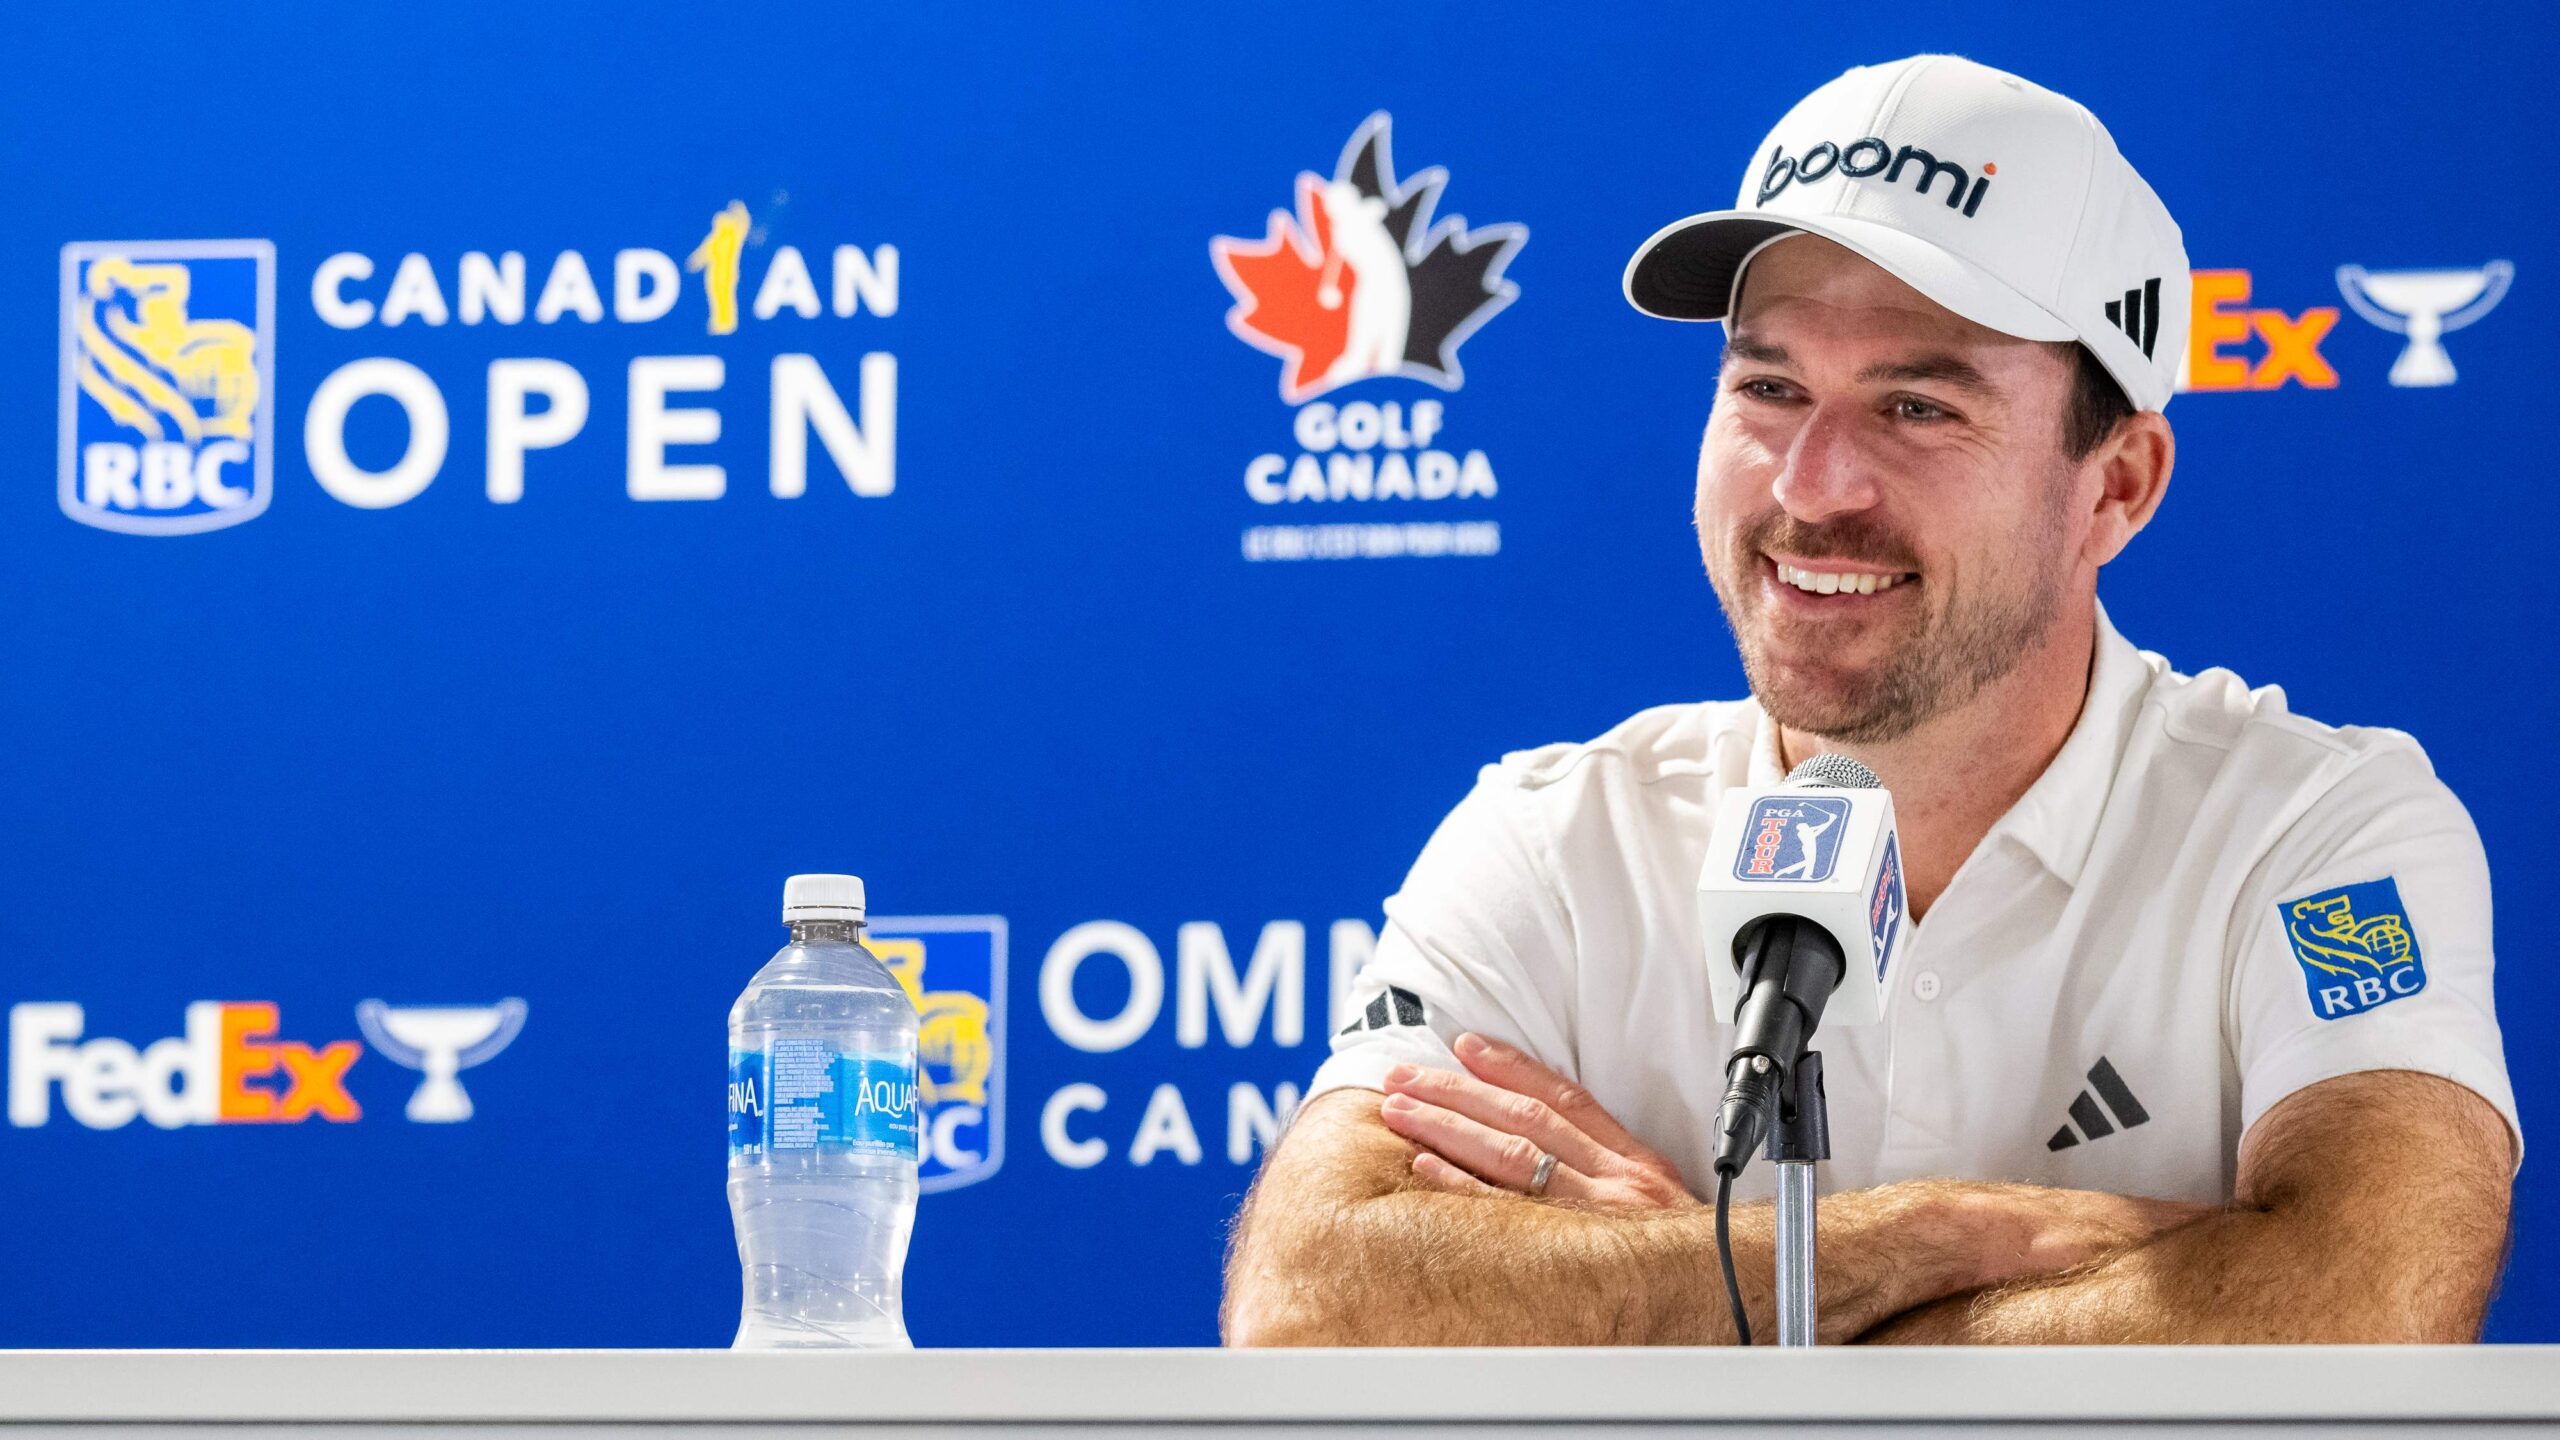 All eyes on Nick Taylor at RBC Canadian Open